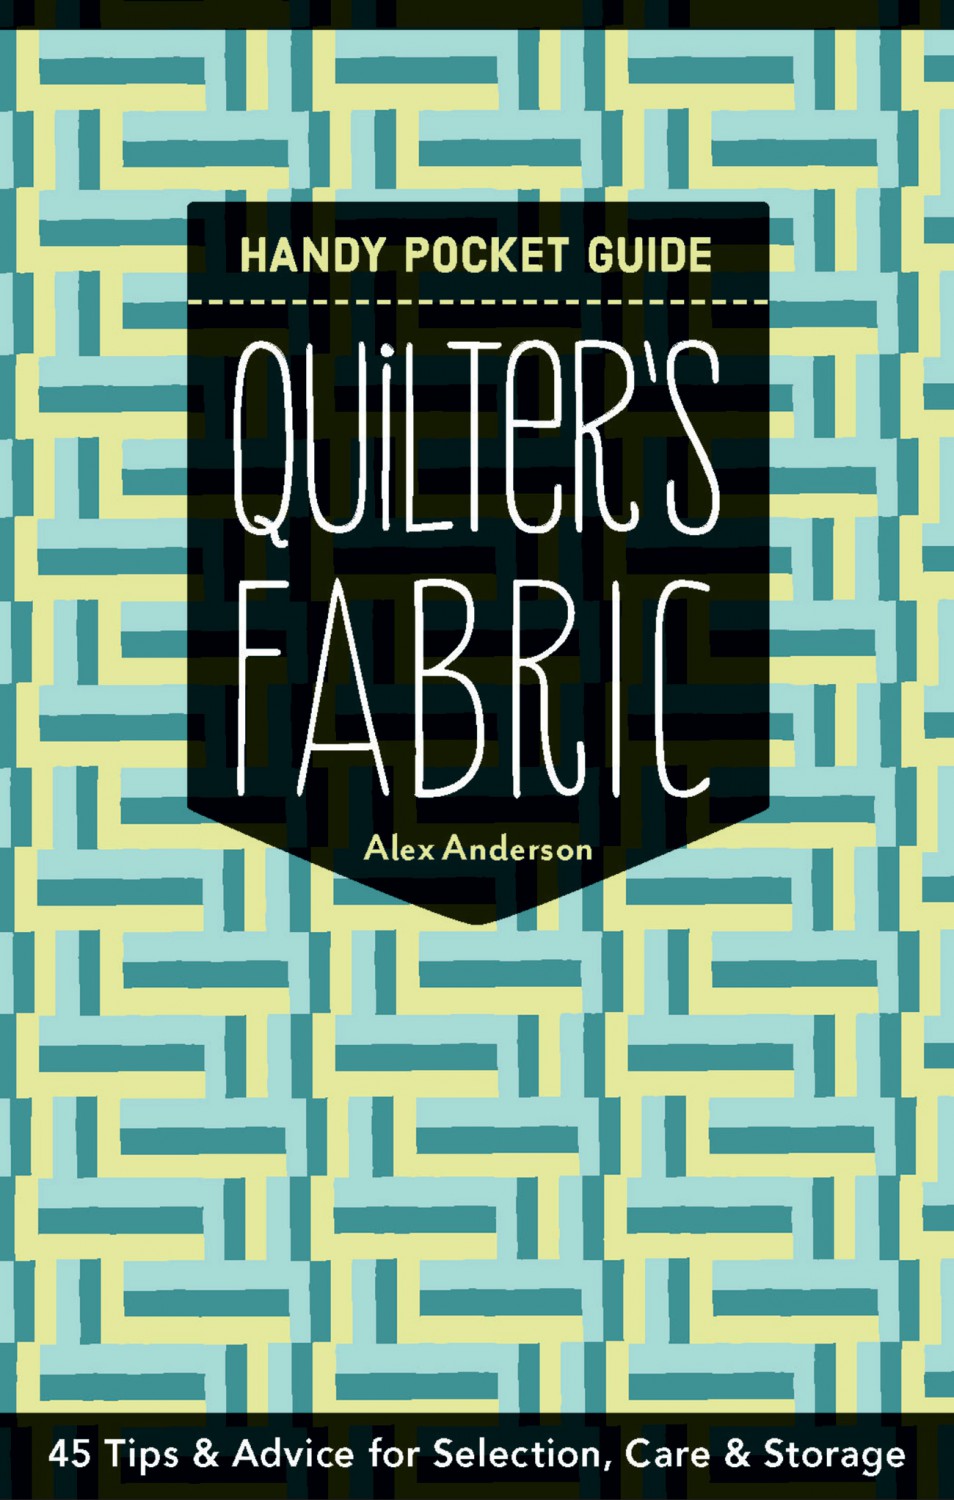 Quilter's Fabric Handy Pocket Guide Book by Alex Anderson for C&T Publishing